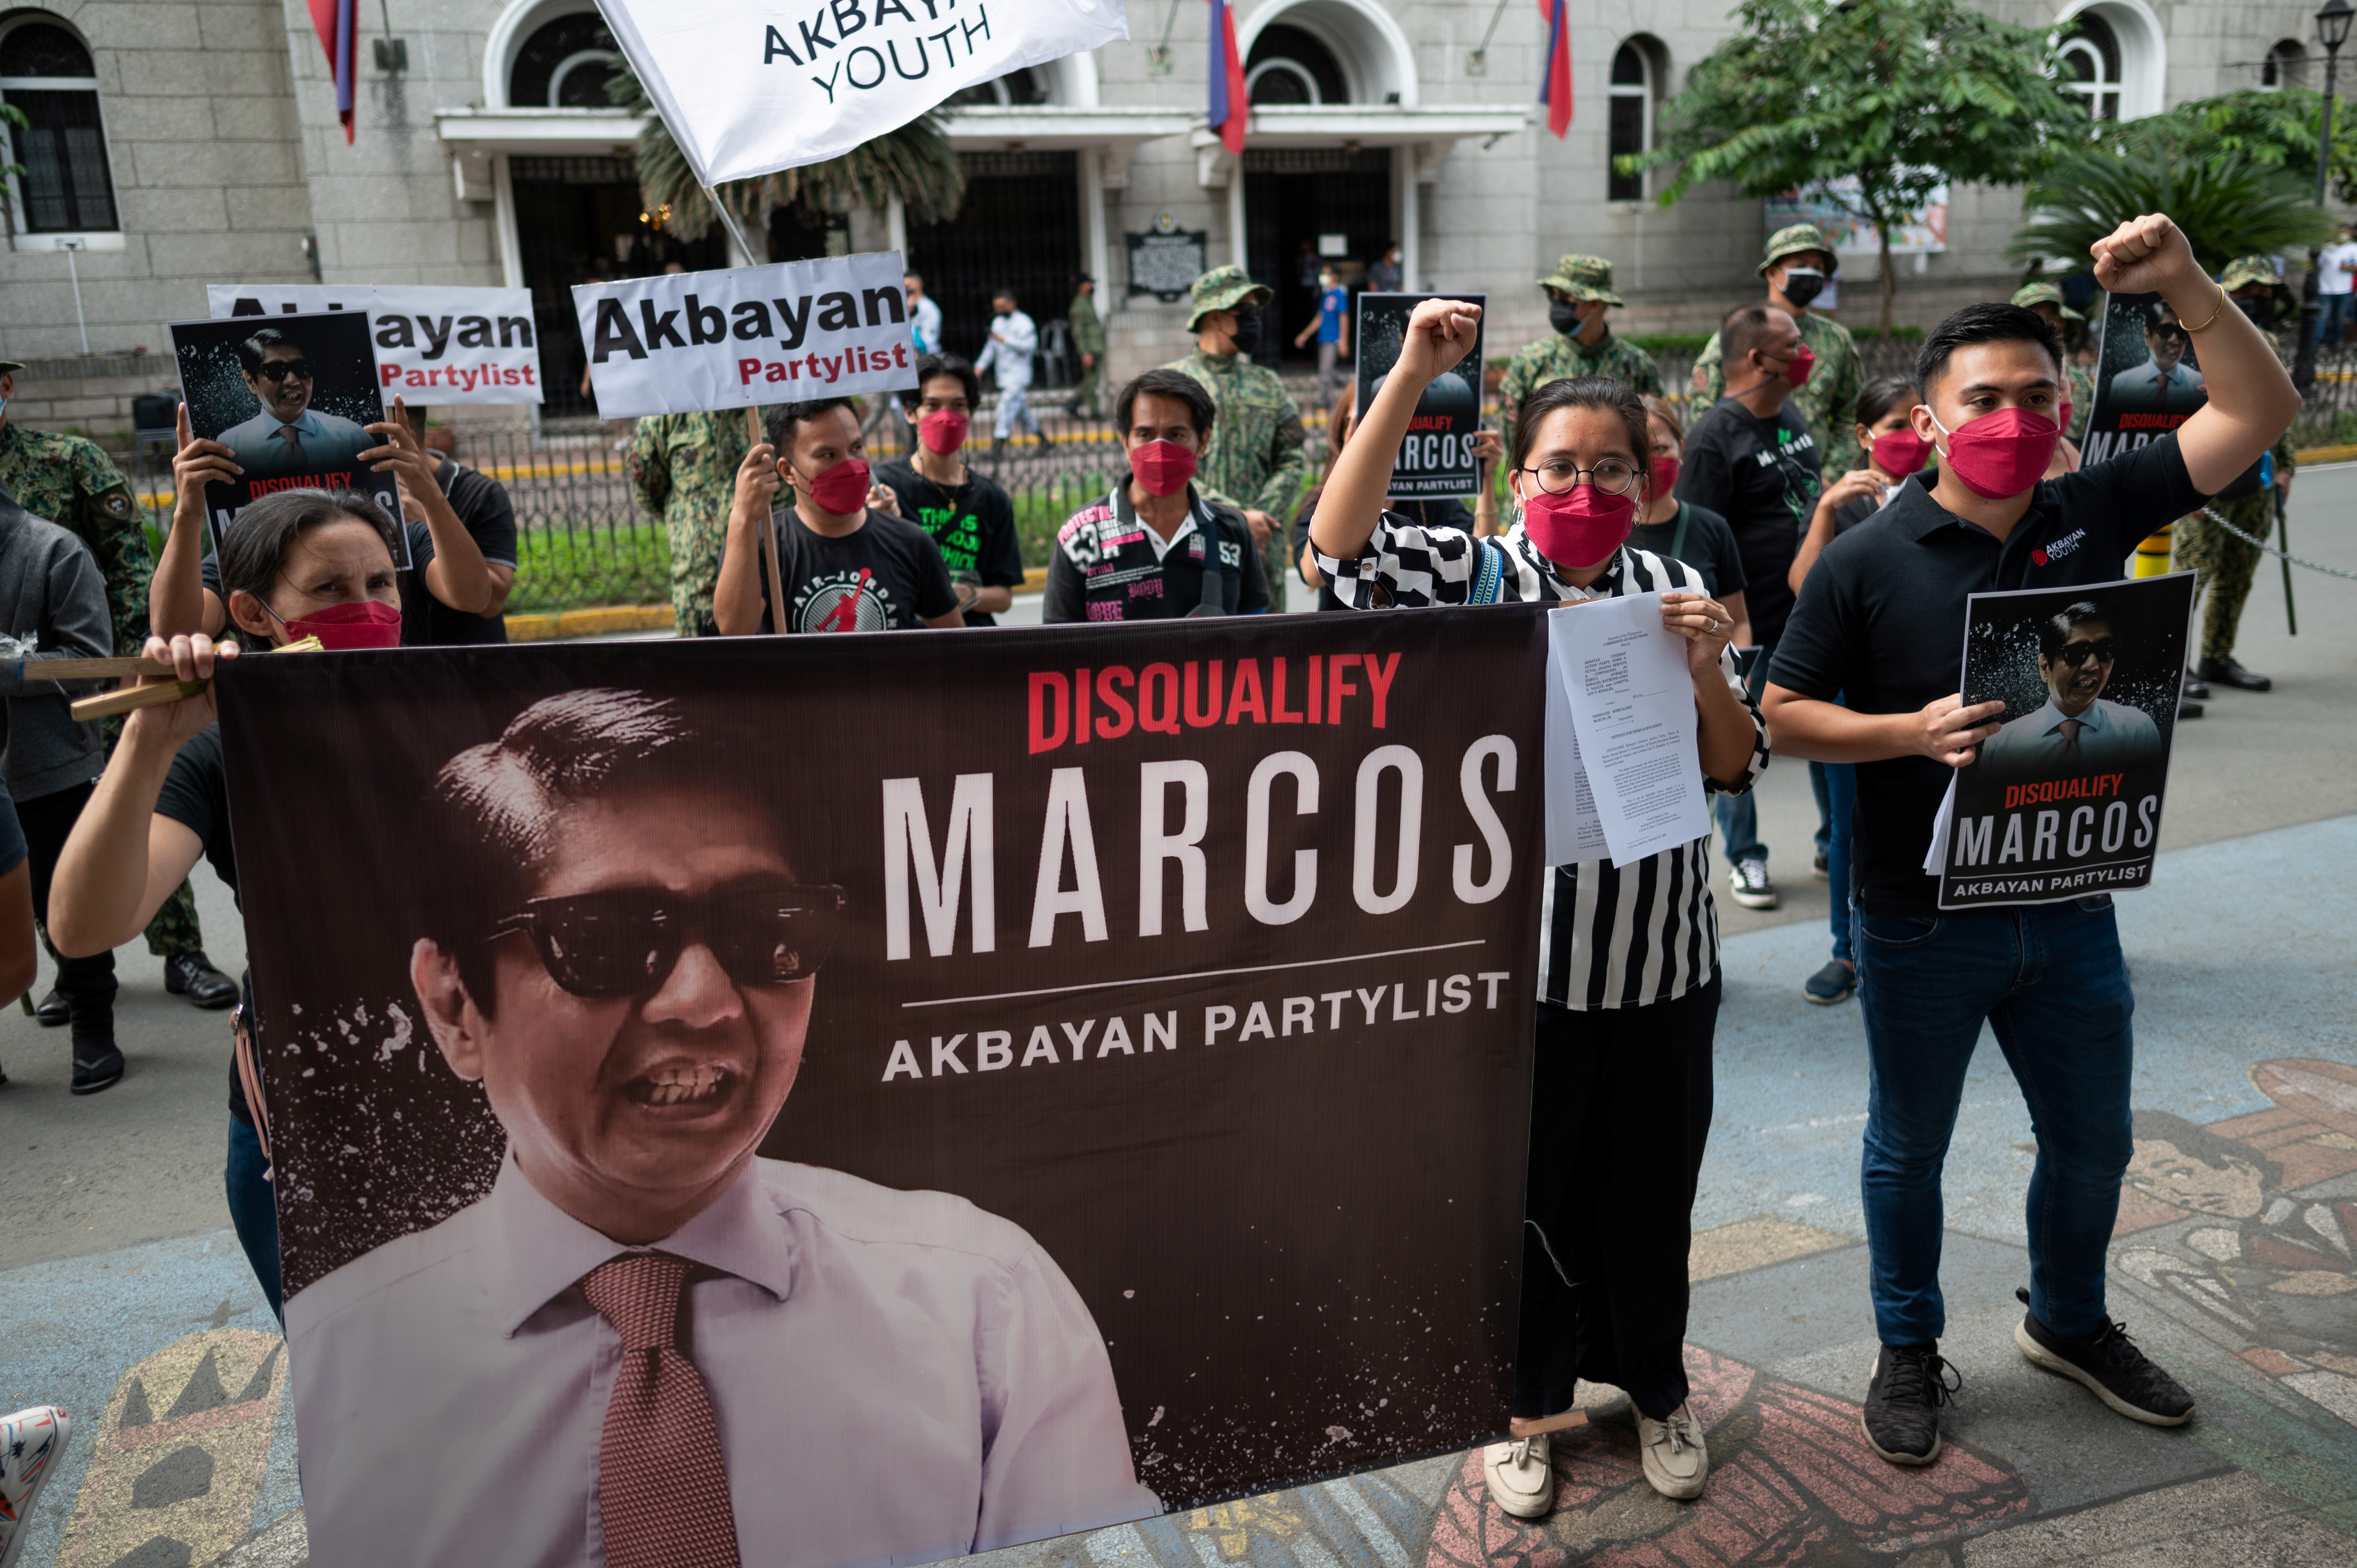 Members of Akbayan Partylist gather outside the Commission on Elections during the filing of a petition for disqualification against late dictator's son Ferdinand “Bongbong” Marcos Jr., who is running for the presidency in the 2022 national elections, in Manila, Philippines, December 2, 2021. REUTERS/Lisa Marie David